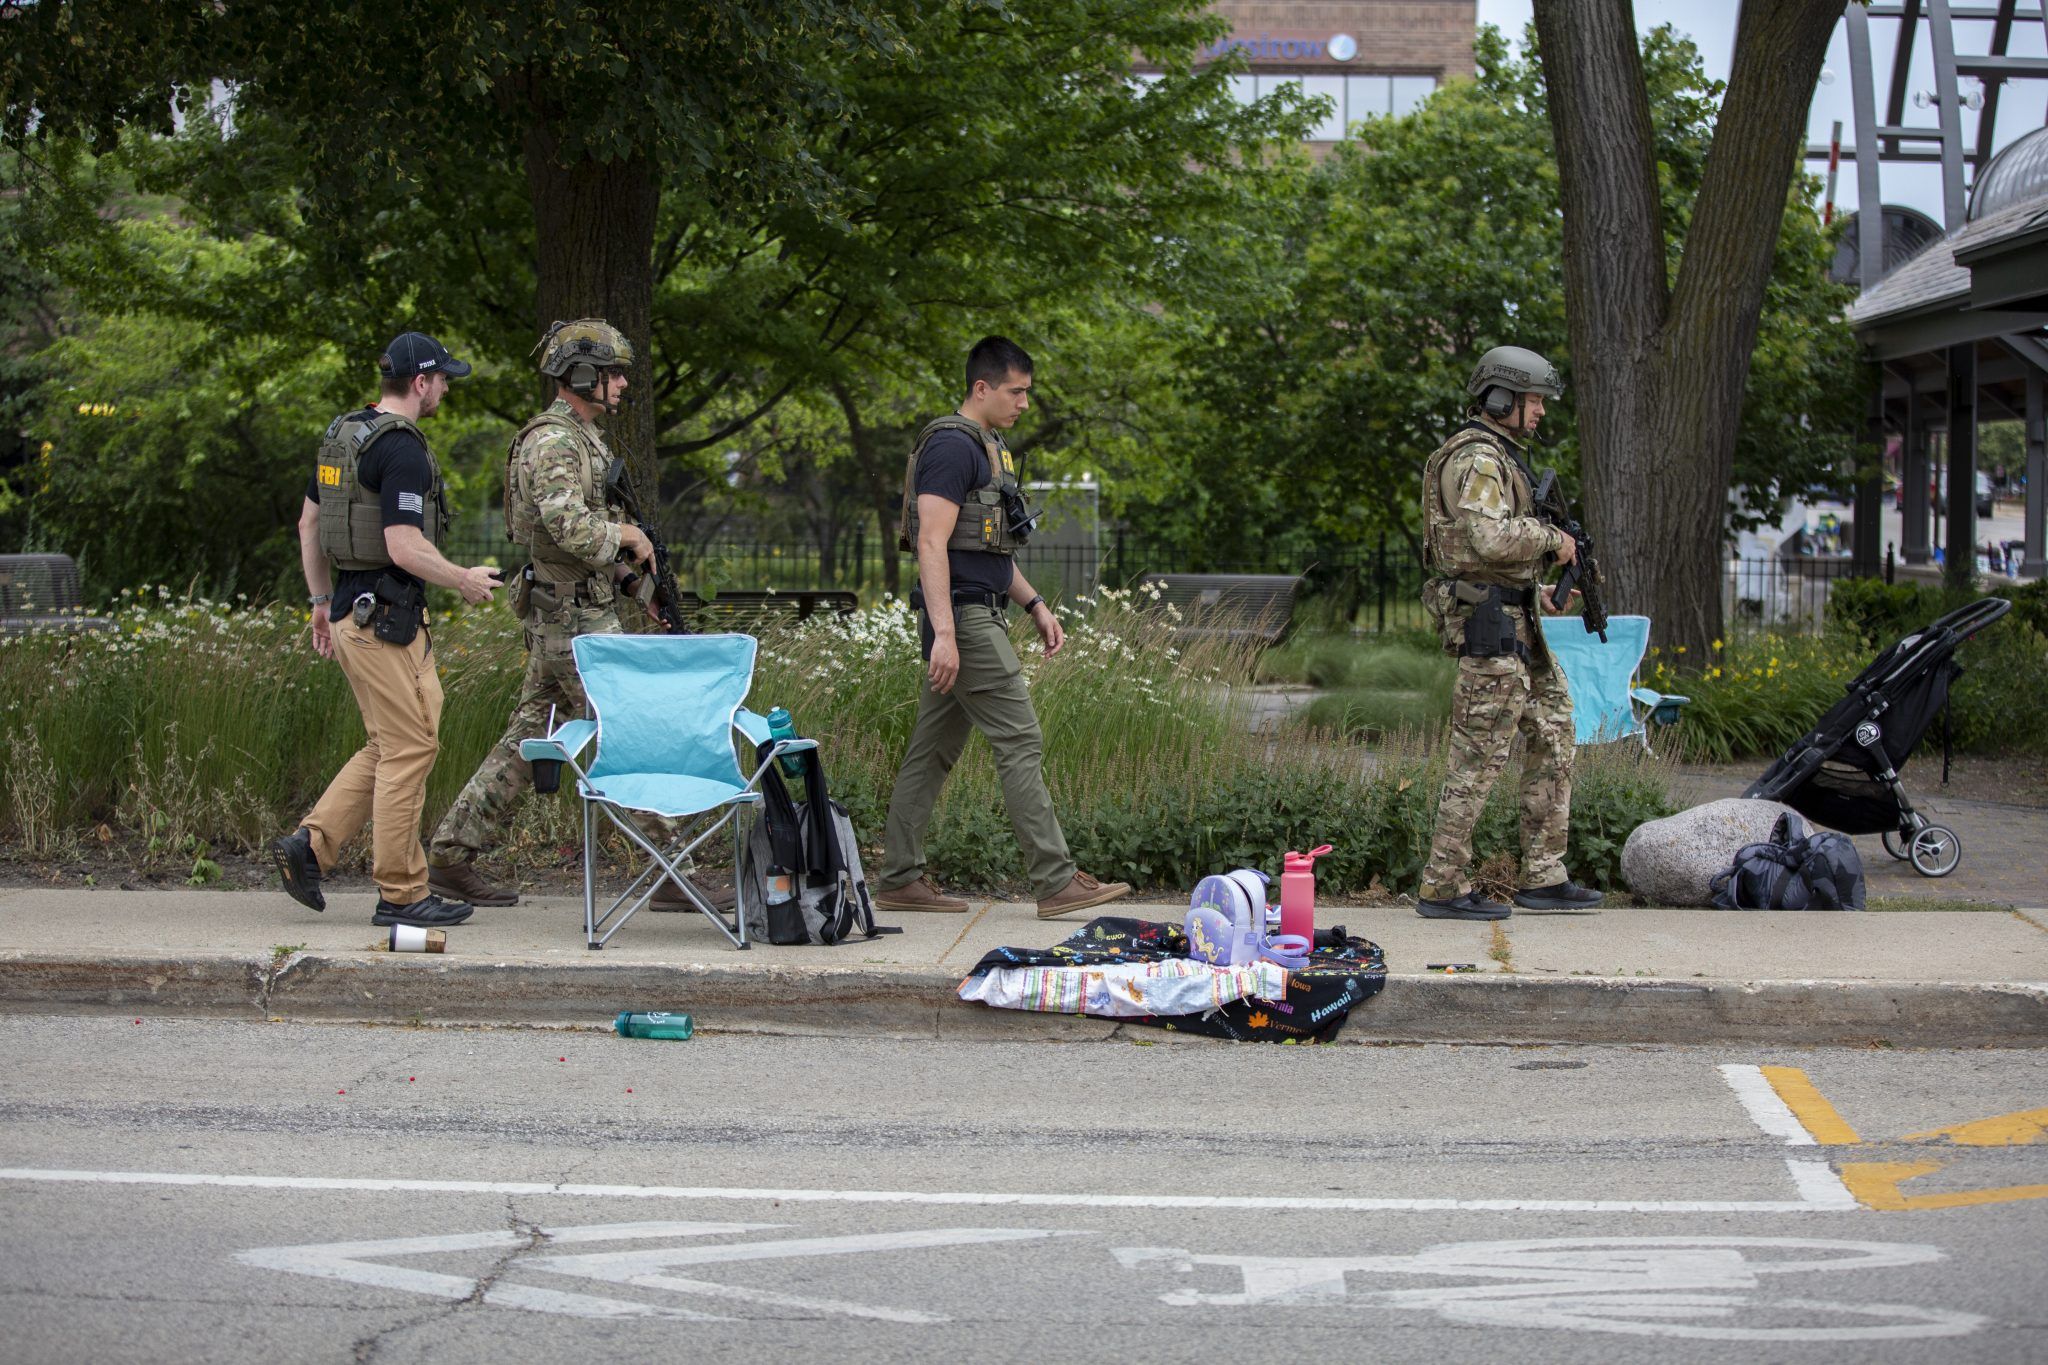 HIGHLAND PARK, IL - JULY 04: Law enforcement works the scene after a mass shooting at a Fourth of July parade on July 4, 2022 in Highland Park, Illinois. Reports indicate at least six people were killed and more than 20 injured in the shooting. (Photo by Jim Vondruska/Getty Images)